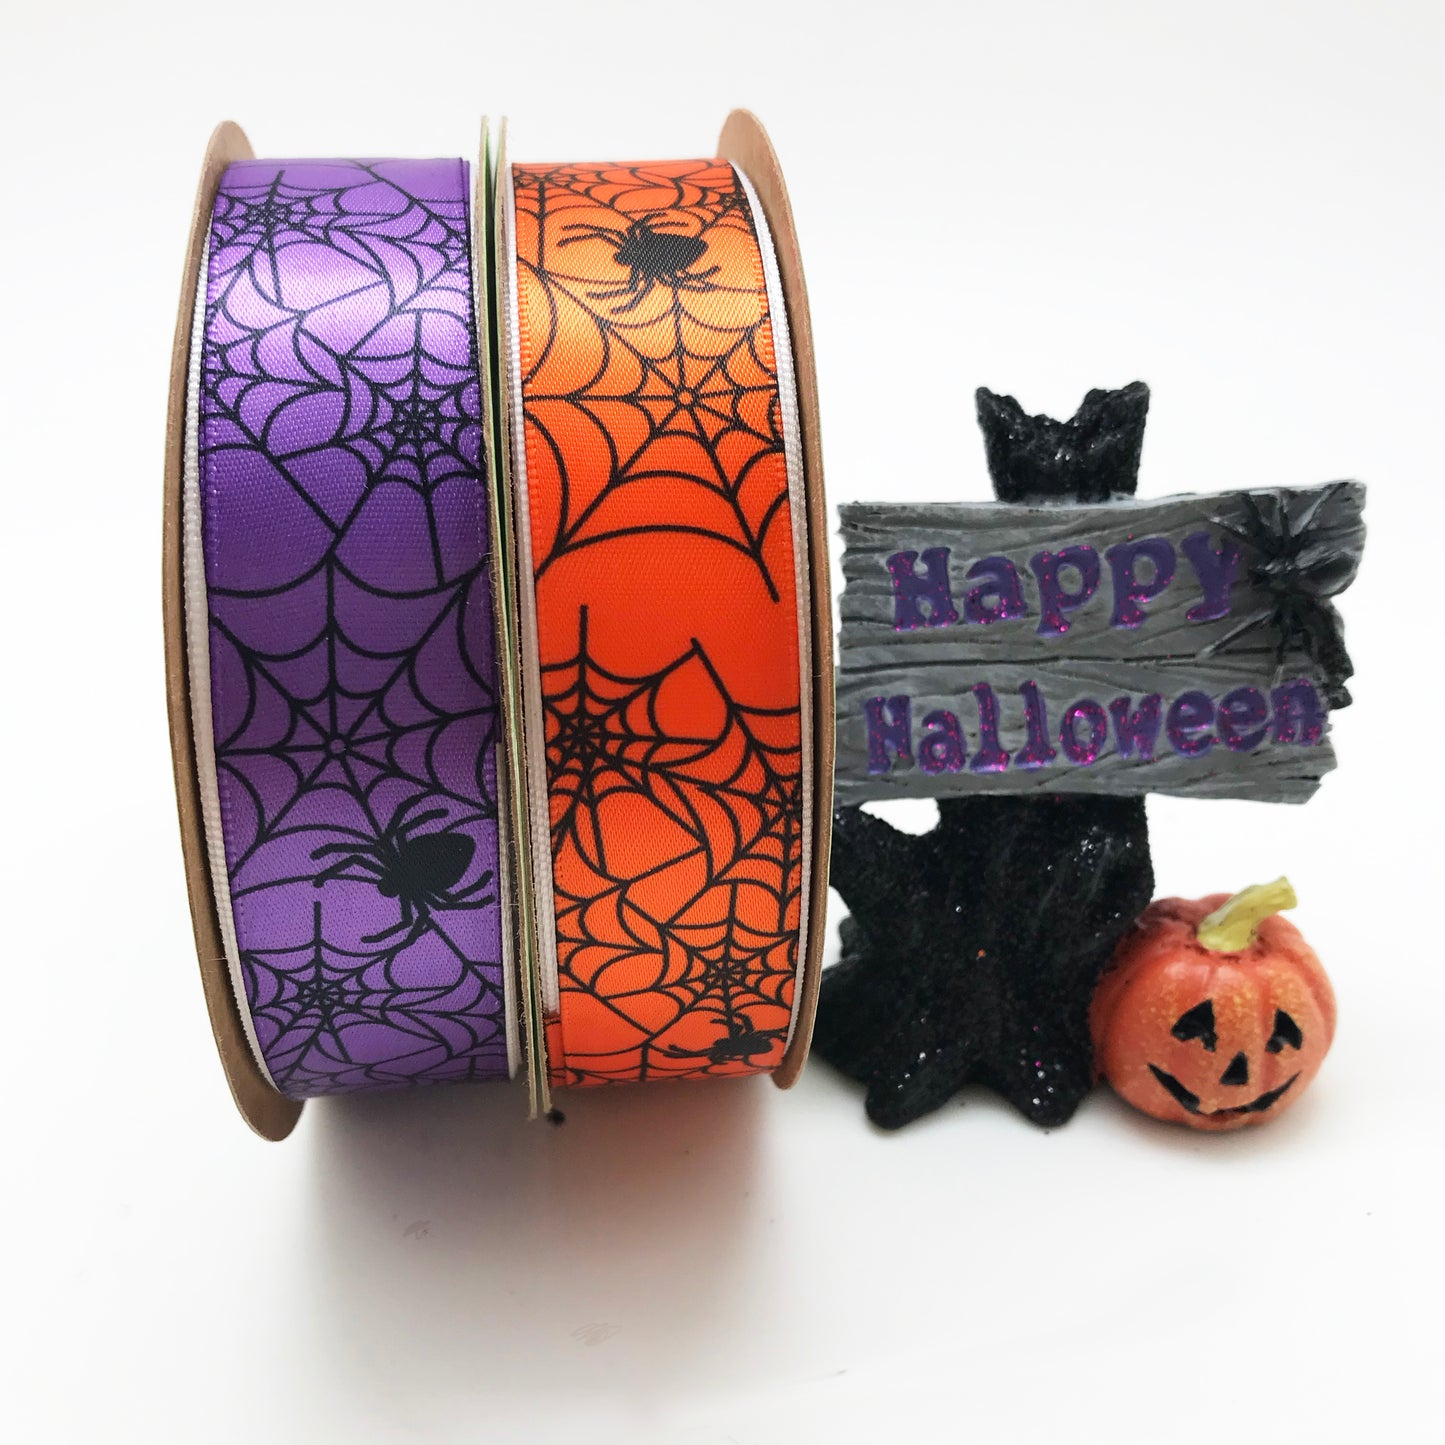 The purple and orange spider web ribbons combine for a fun and traditional Halloween celebration.